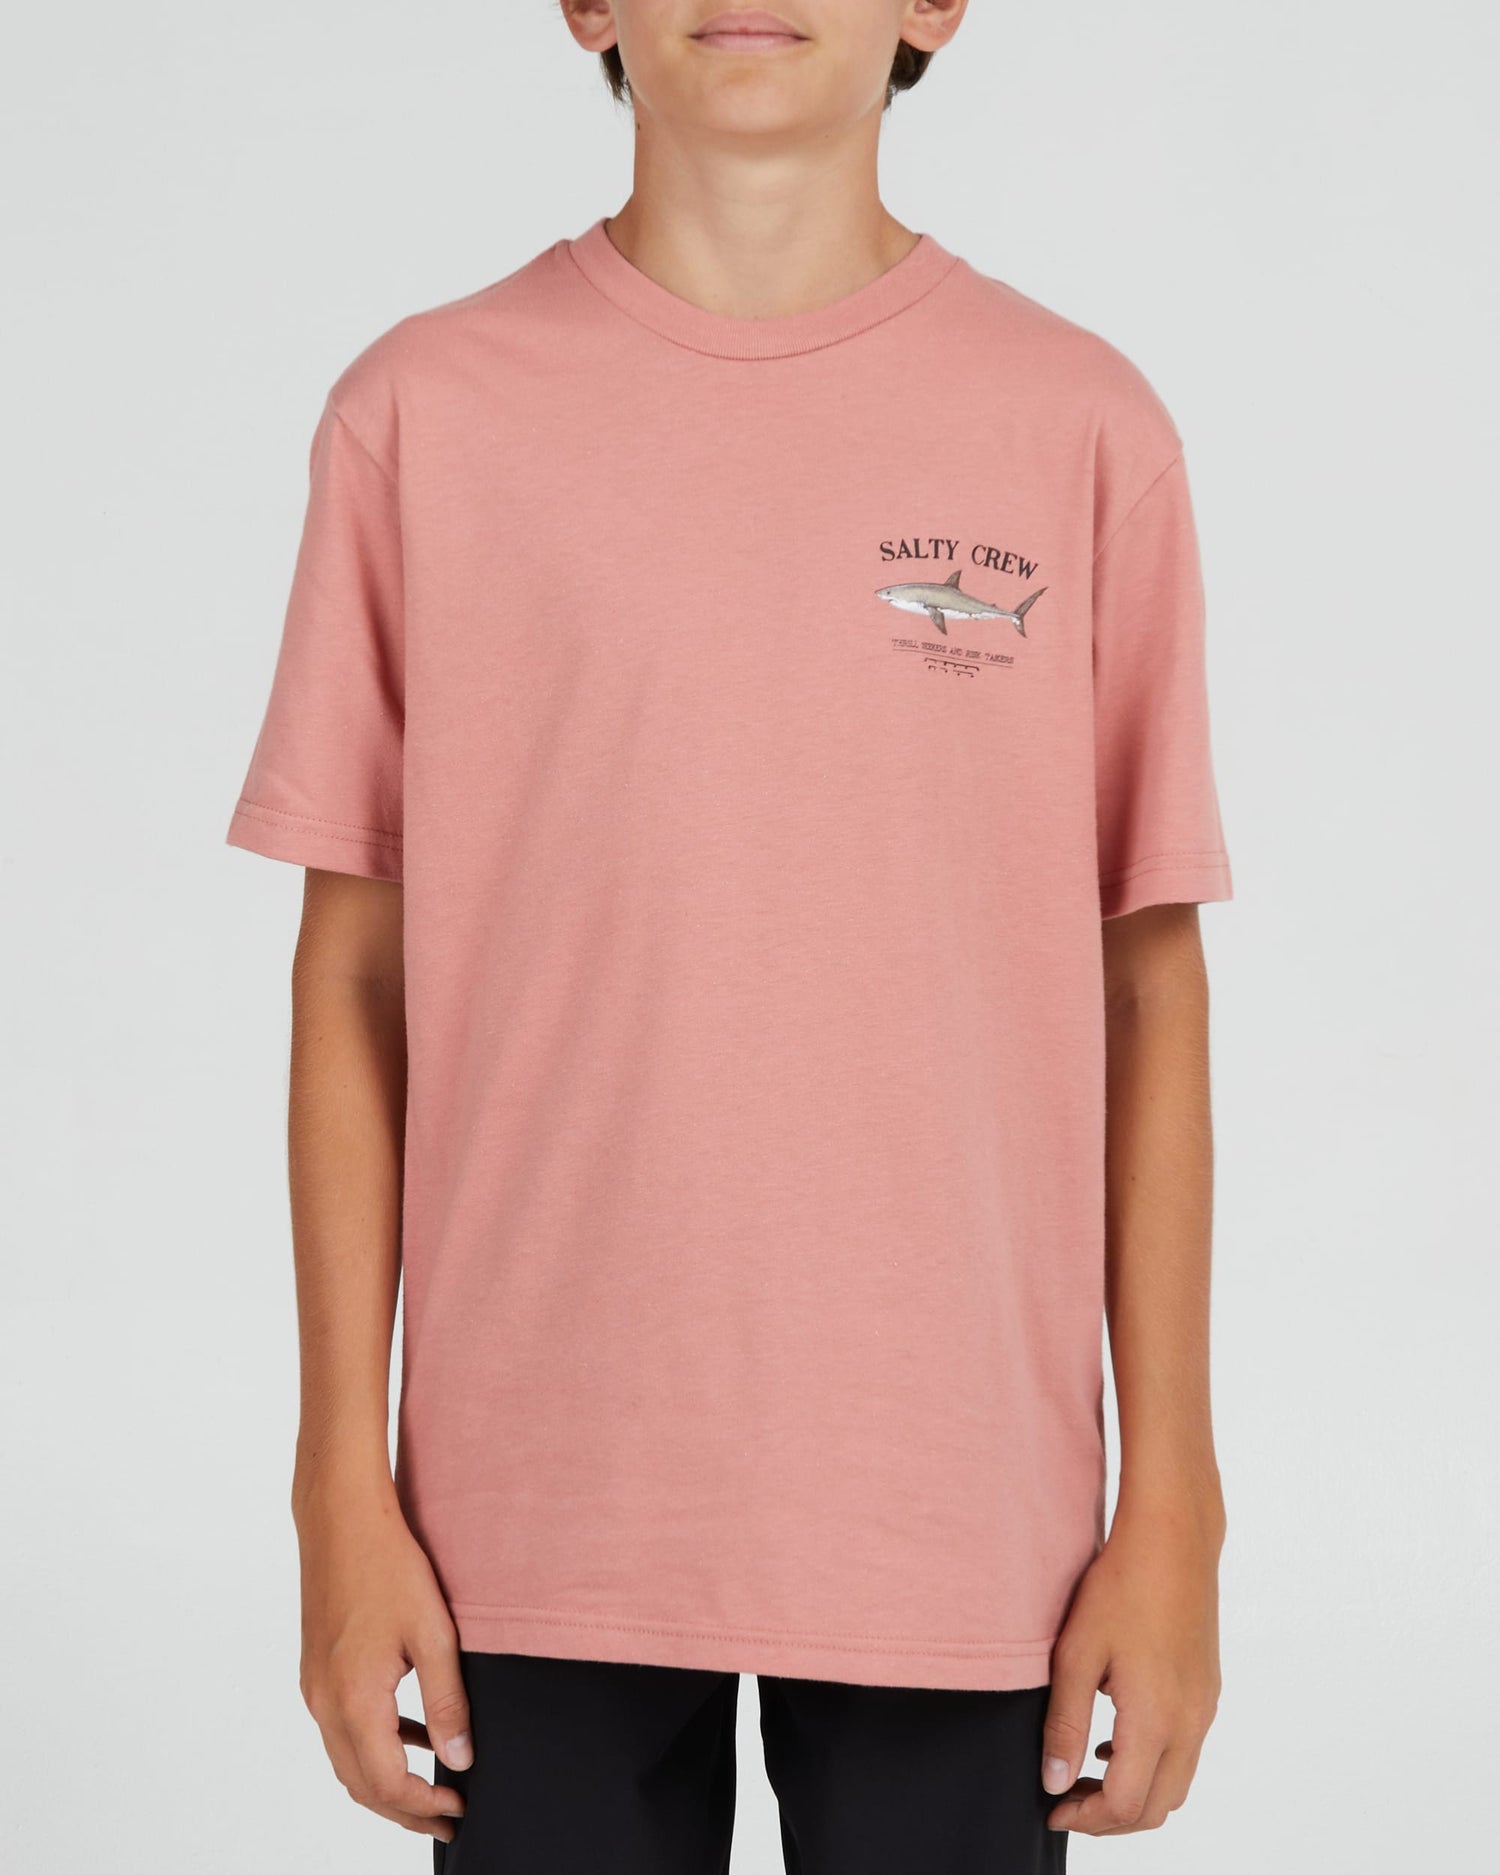 Salty crew T-SHIRTS S/S Bruce Boys S/S Tee - CORAL in CORAL